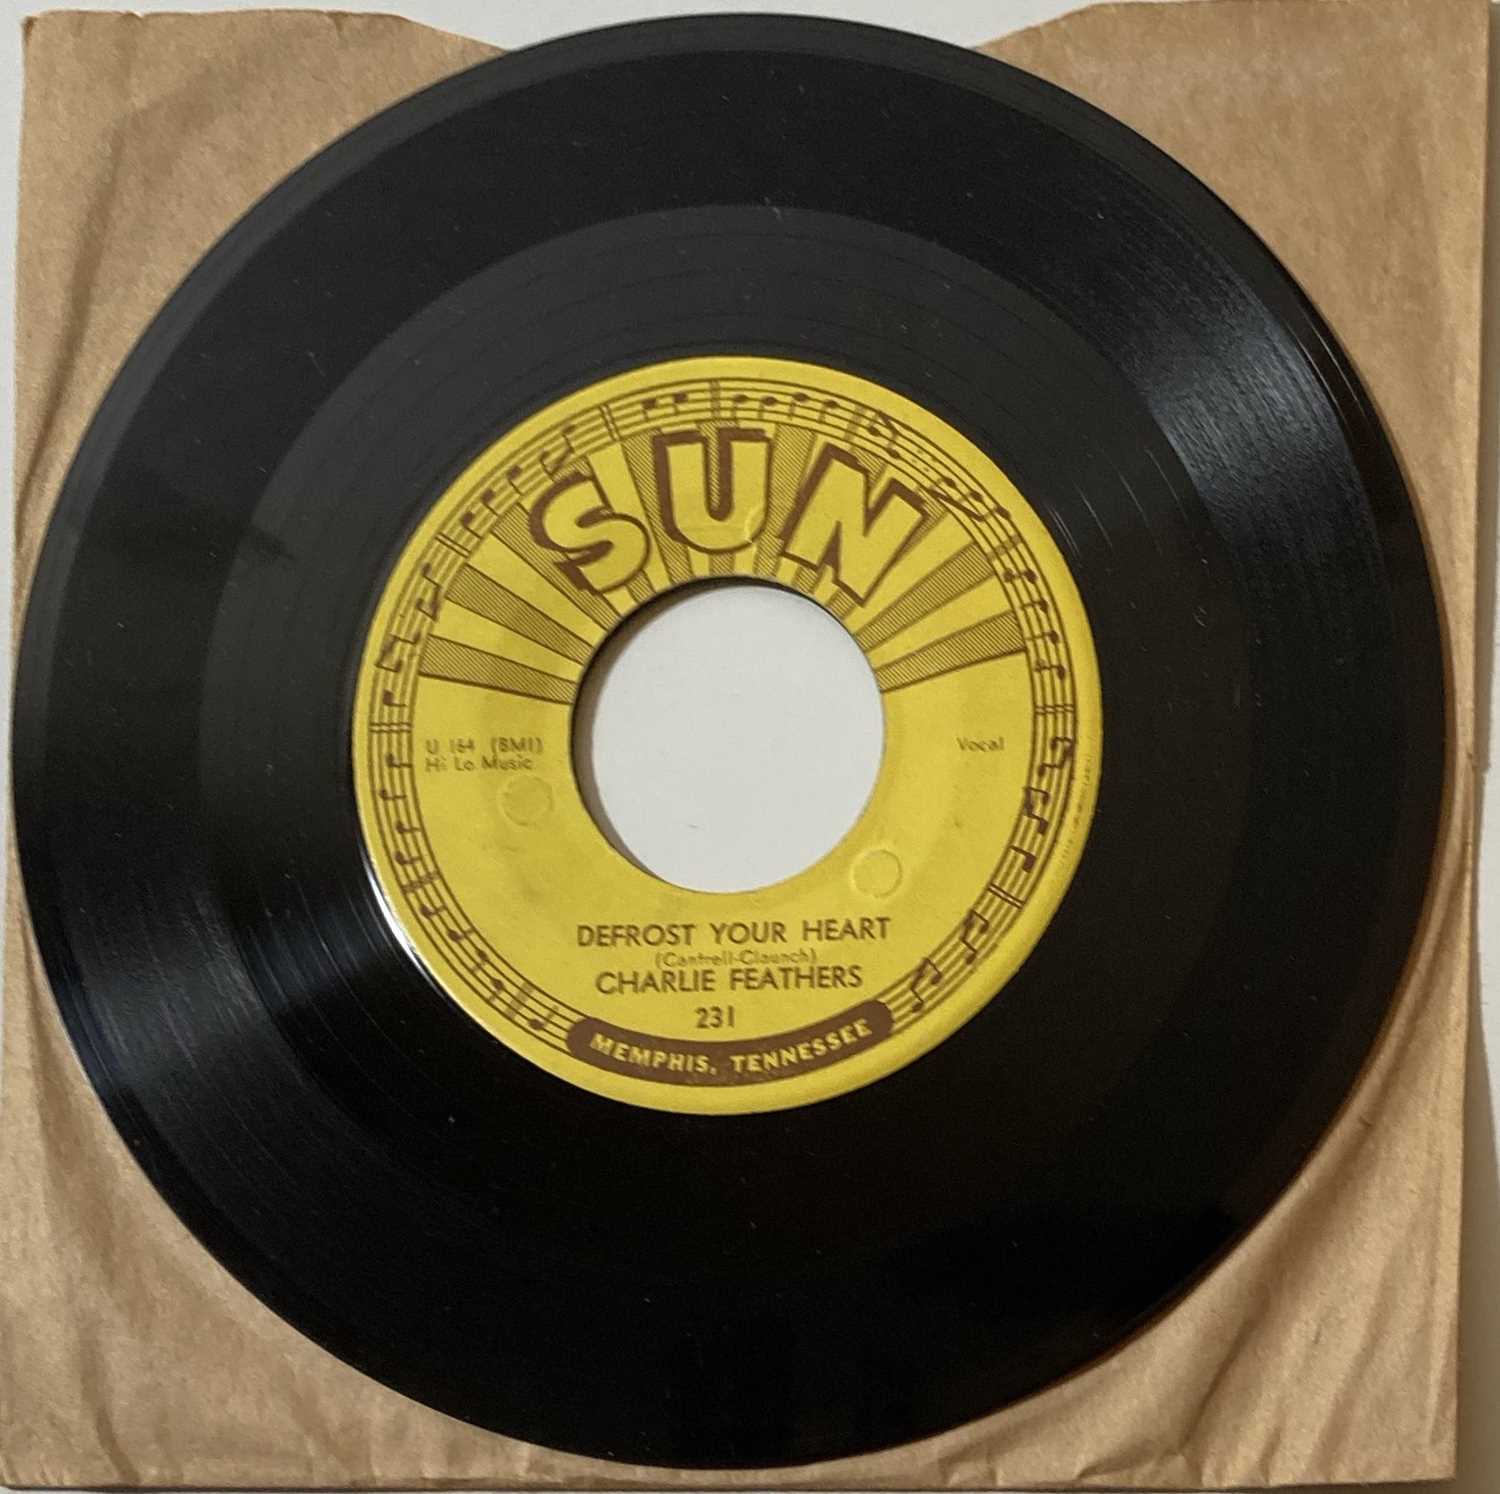 Lot 216 - SUN RECORDS COLLECTION - CHARLIE FEATHERS - DEFROST YOUR HEART - SUN 231.